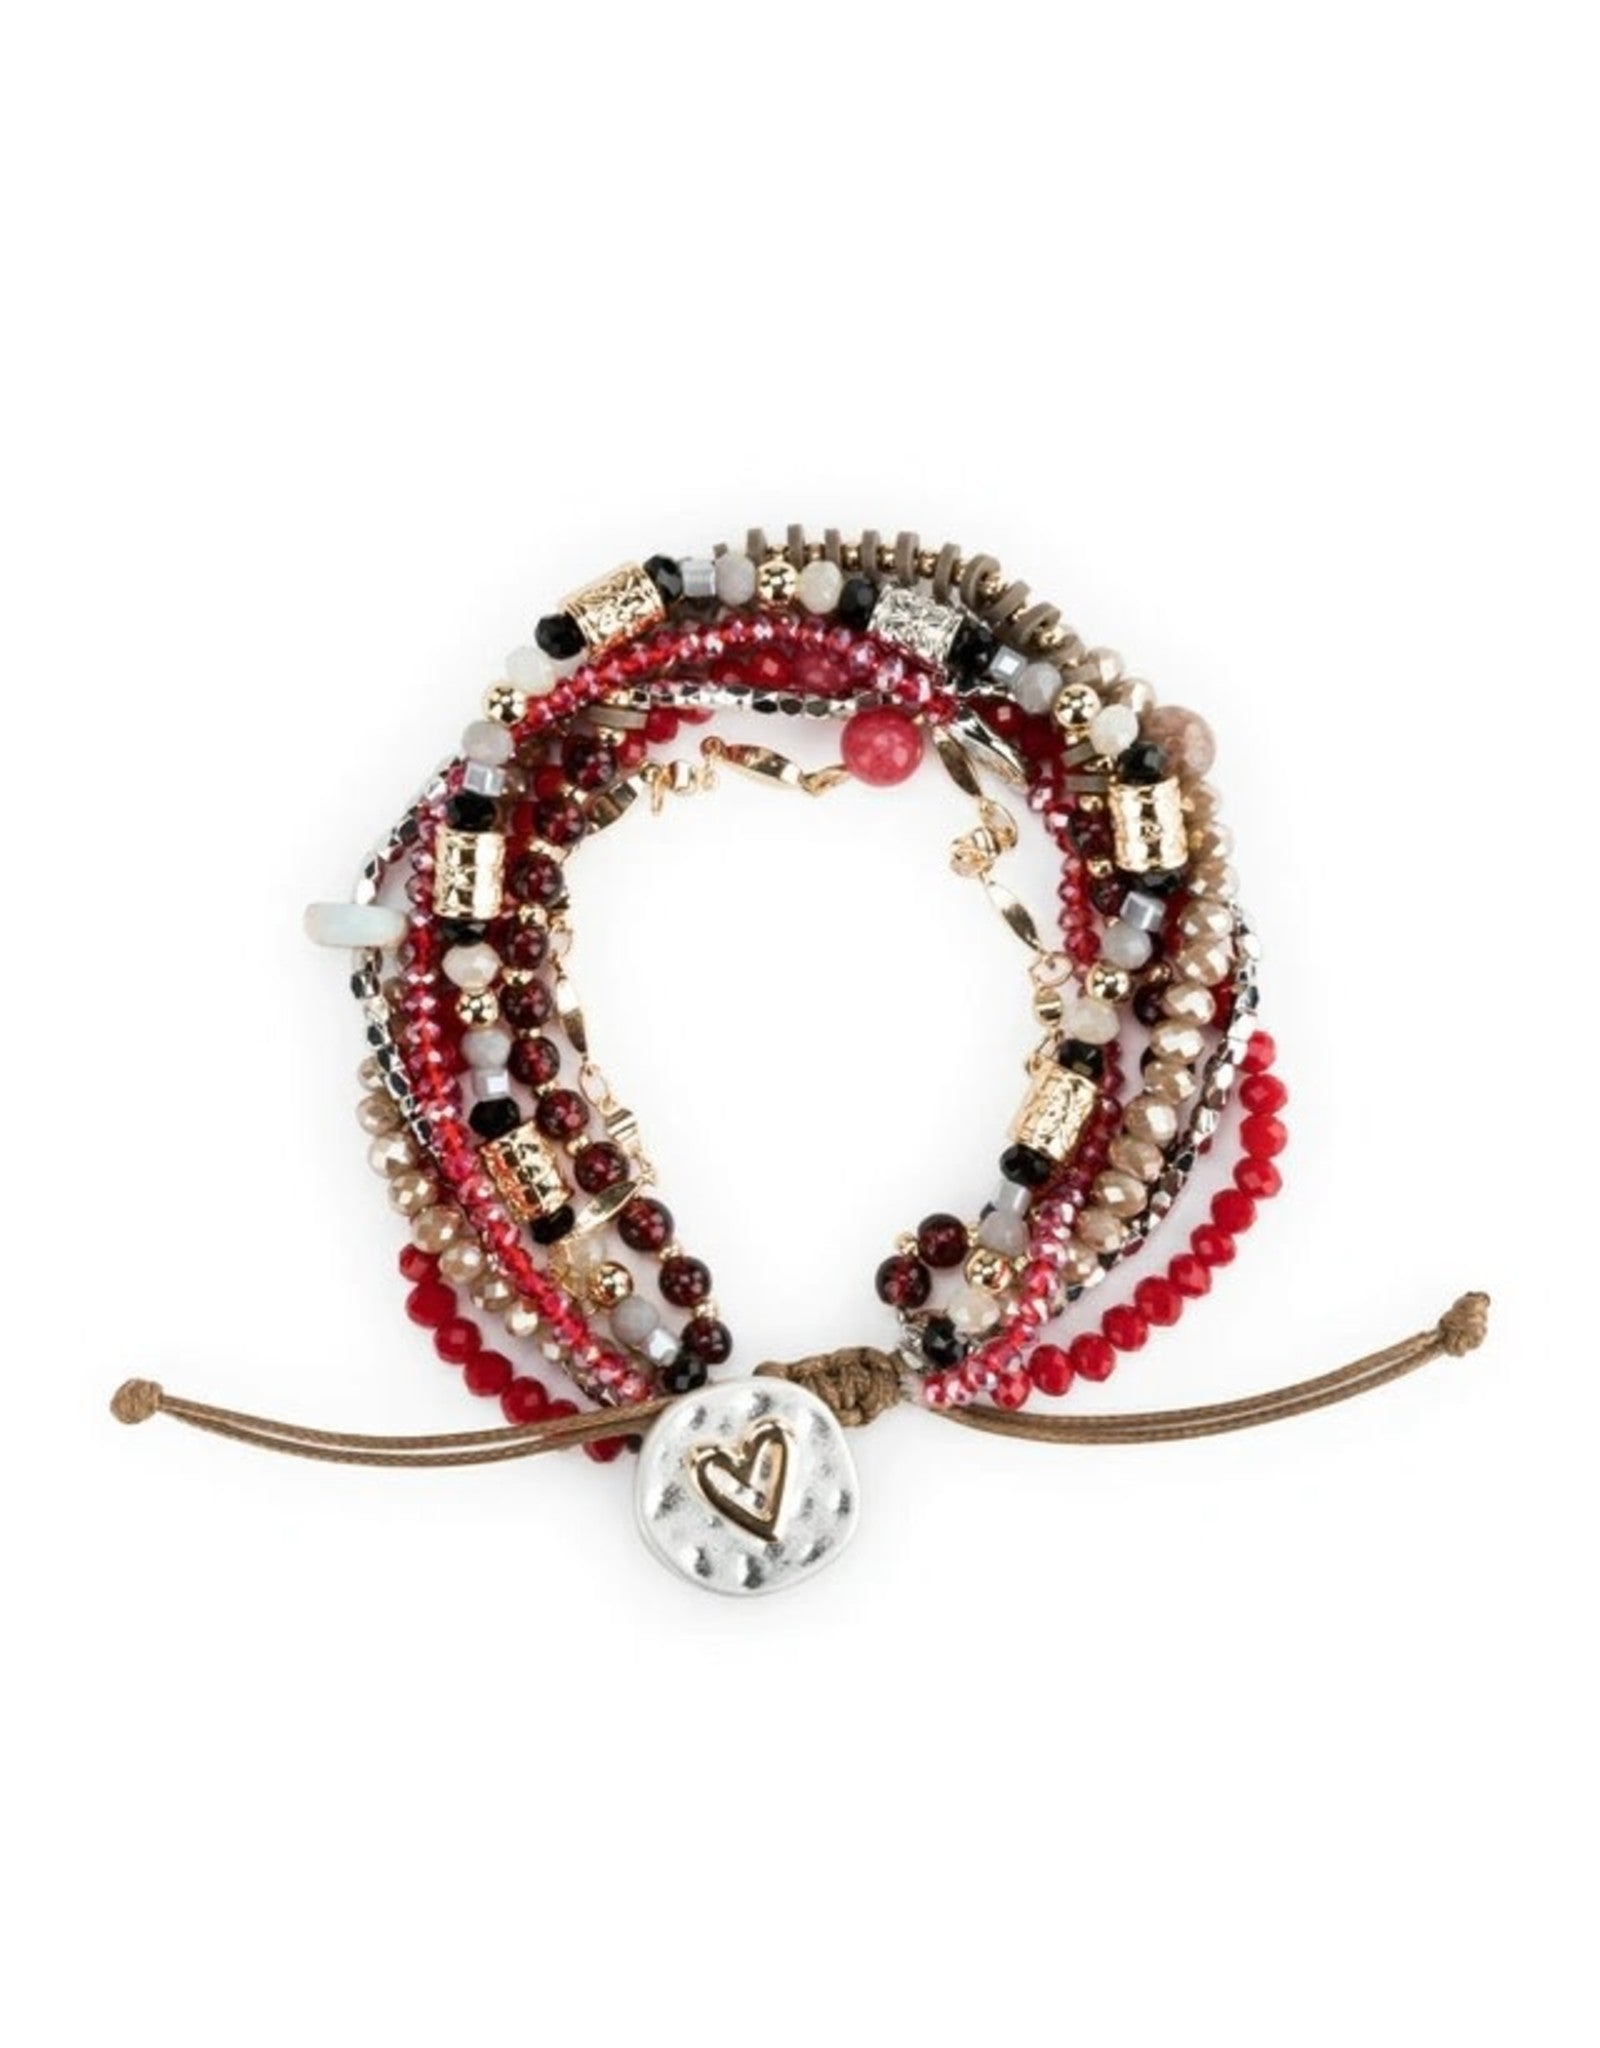 Beaded Love Bracelet (4 Color Options Available)